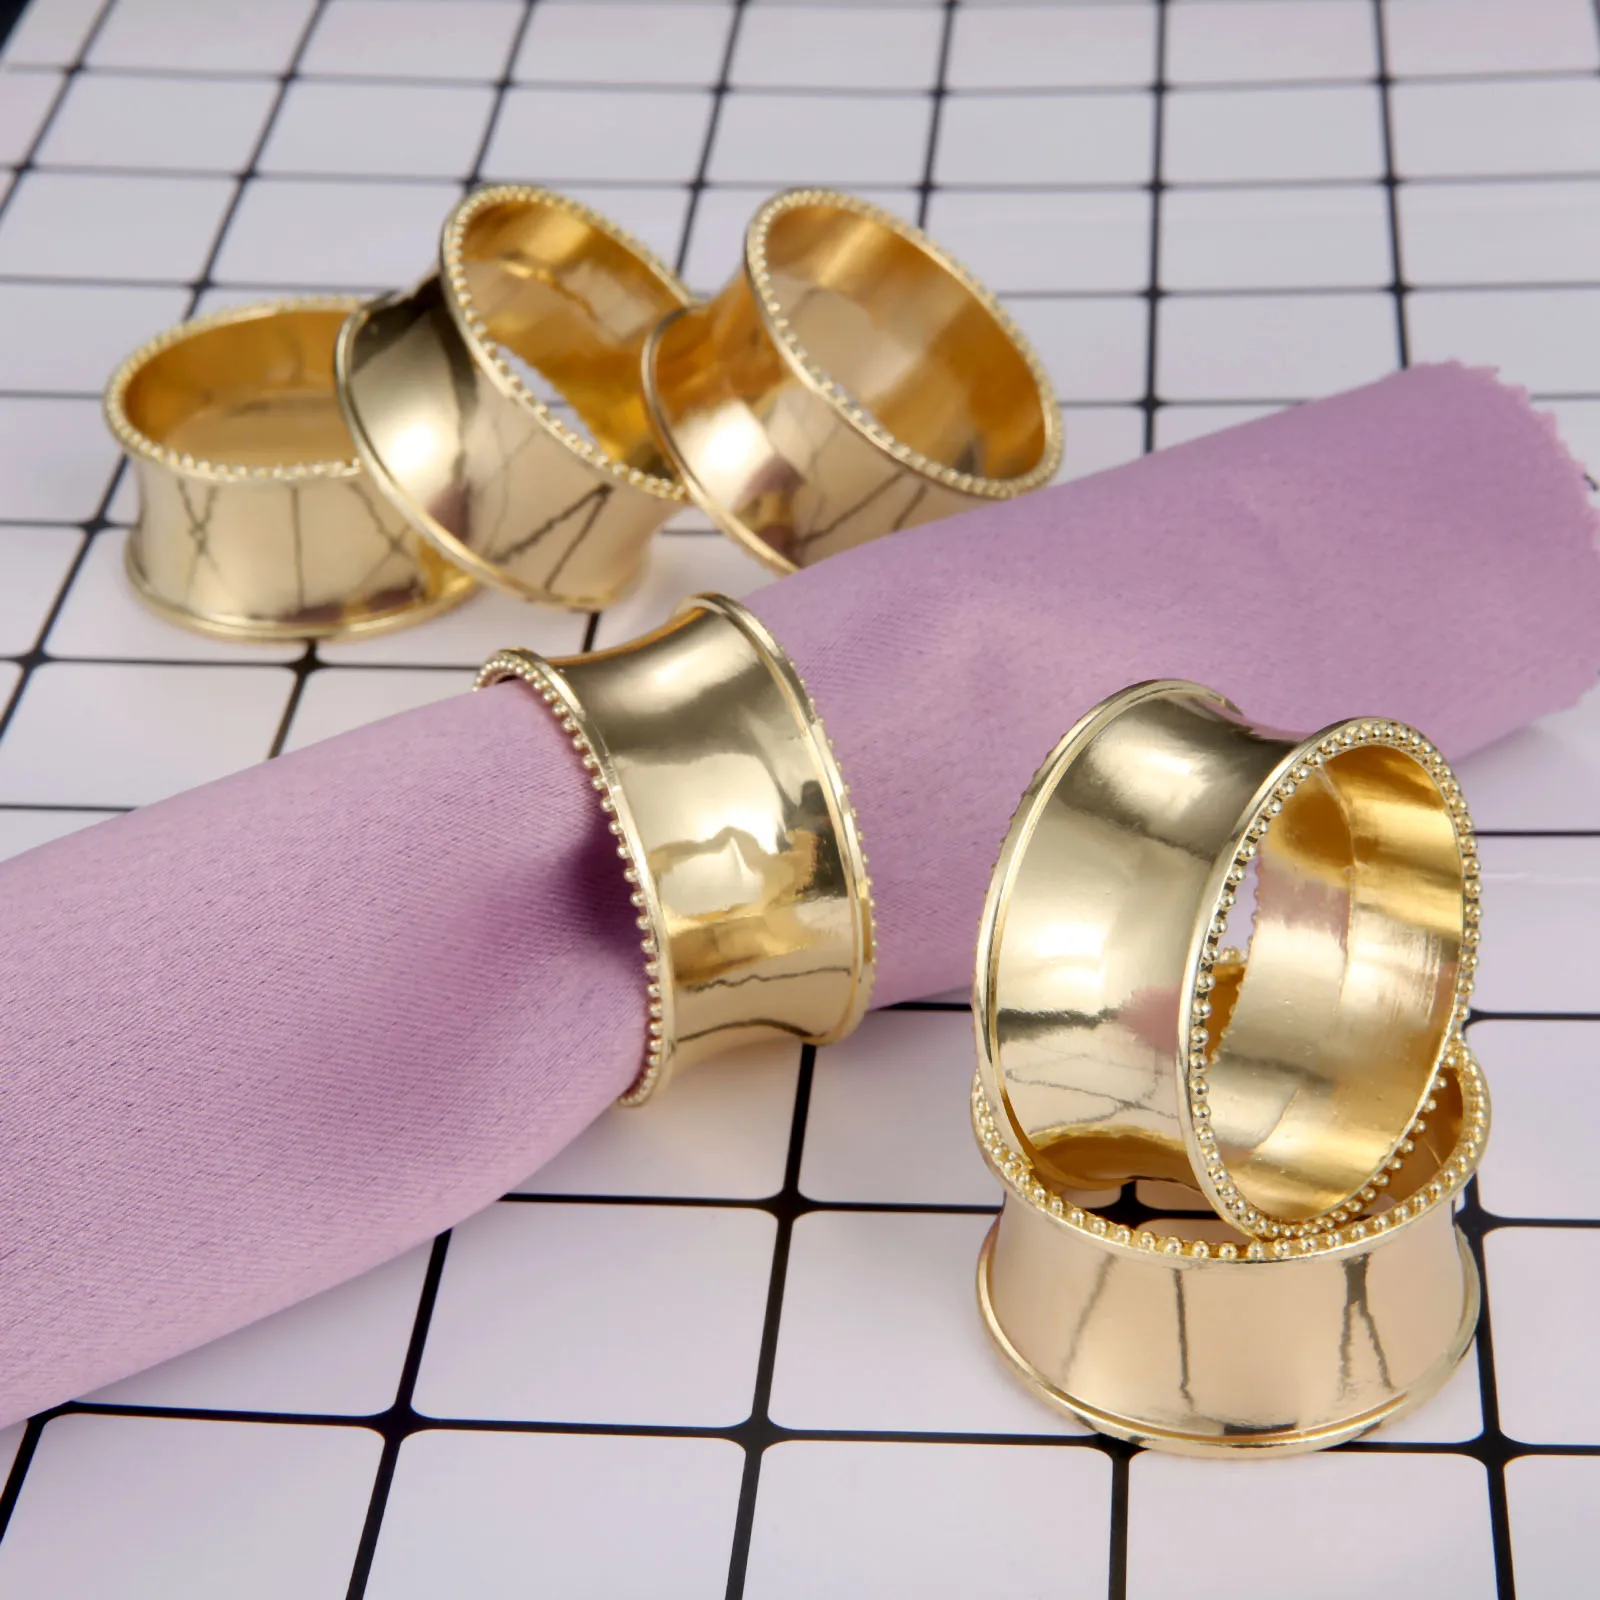 

6Pcs Metal Modern Round Napkin Rings Napkin Buckle Holder Cloth Ring Household Hotel Dinner Table Serviette Exquisite Decoration